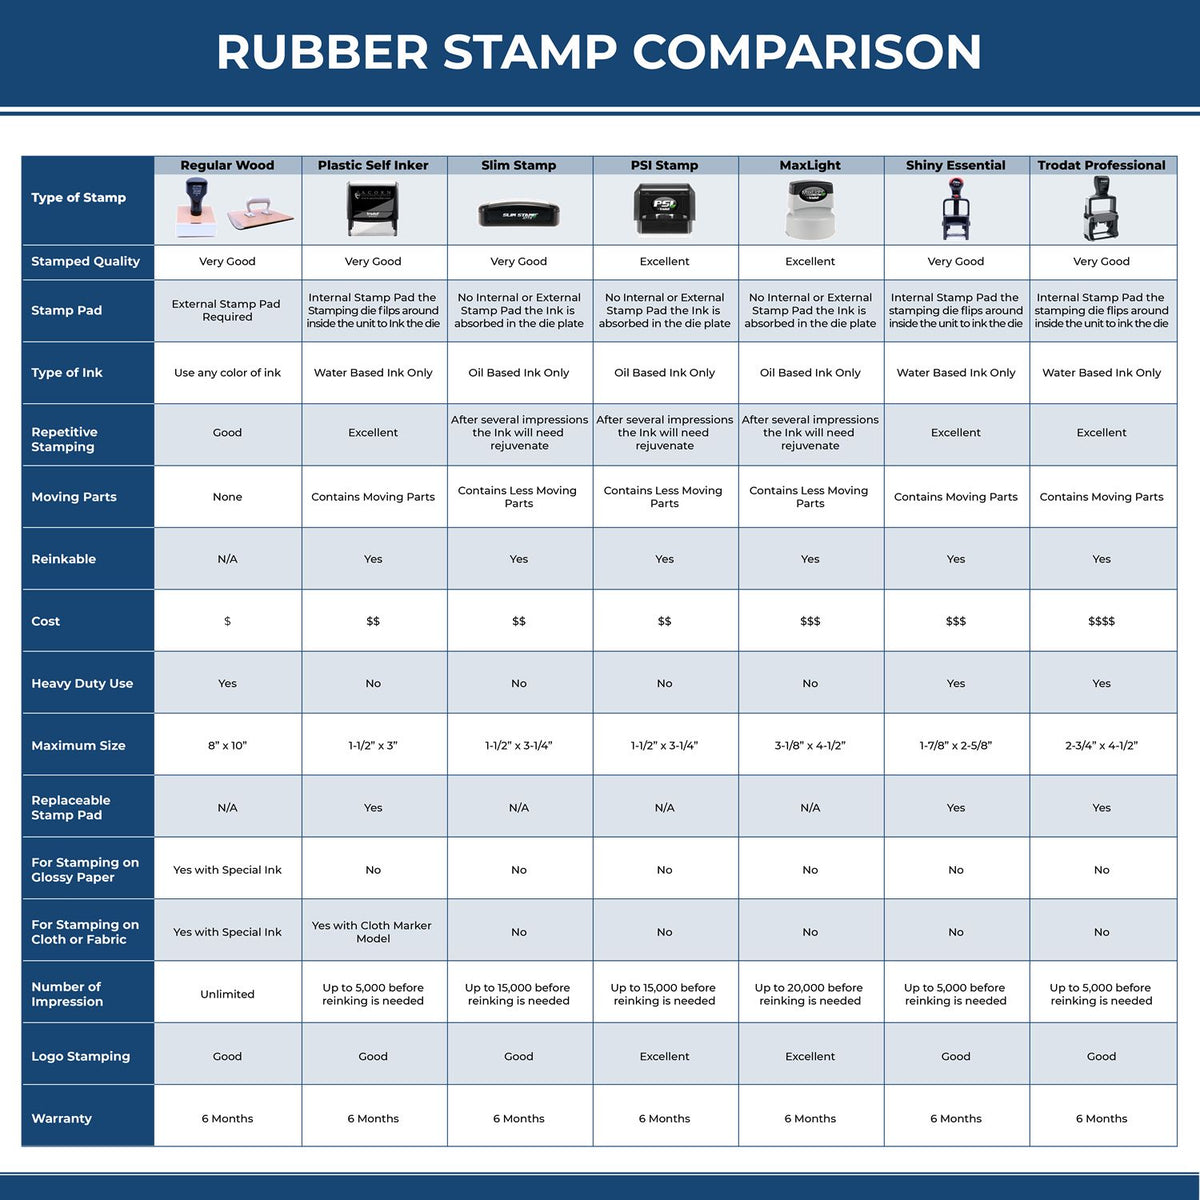 A comparison chart for the different types of mount models available for the Heavy-Duty Guam Rectangular Notary Stamp.